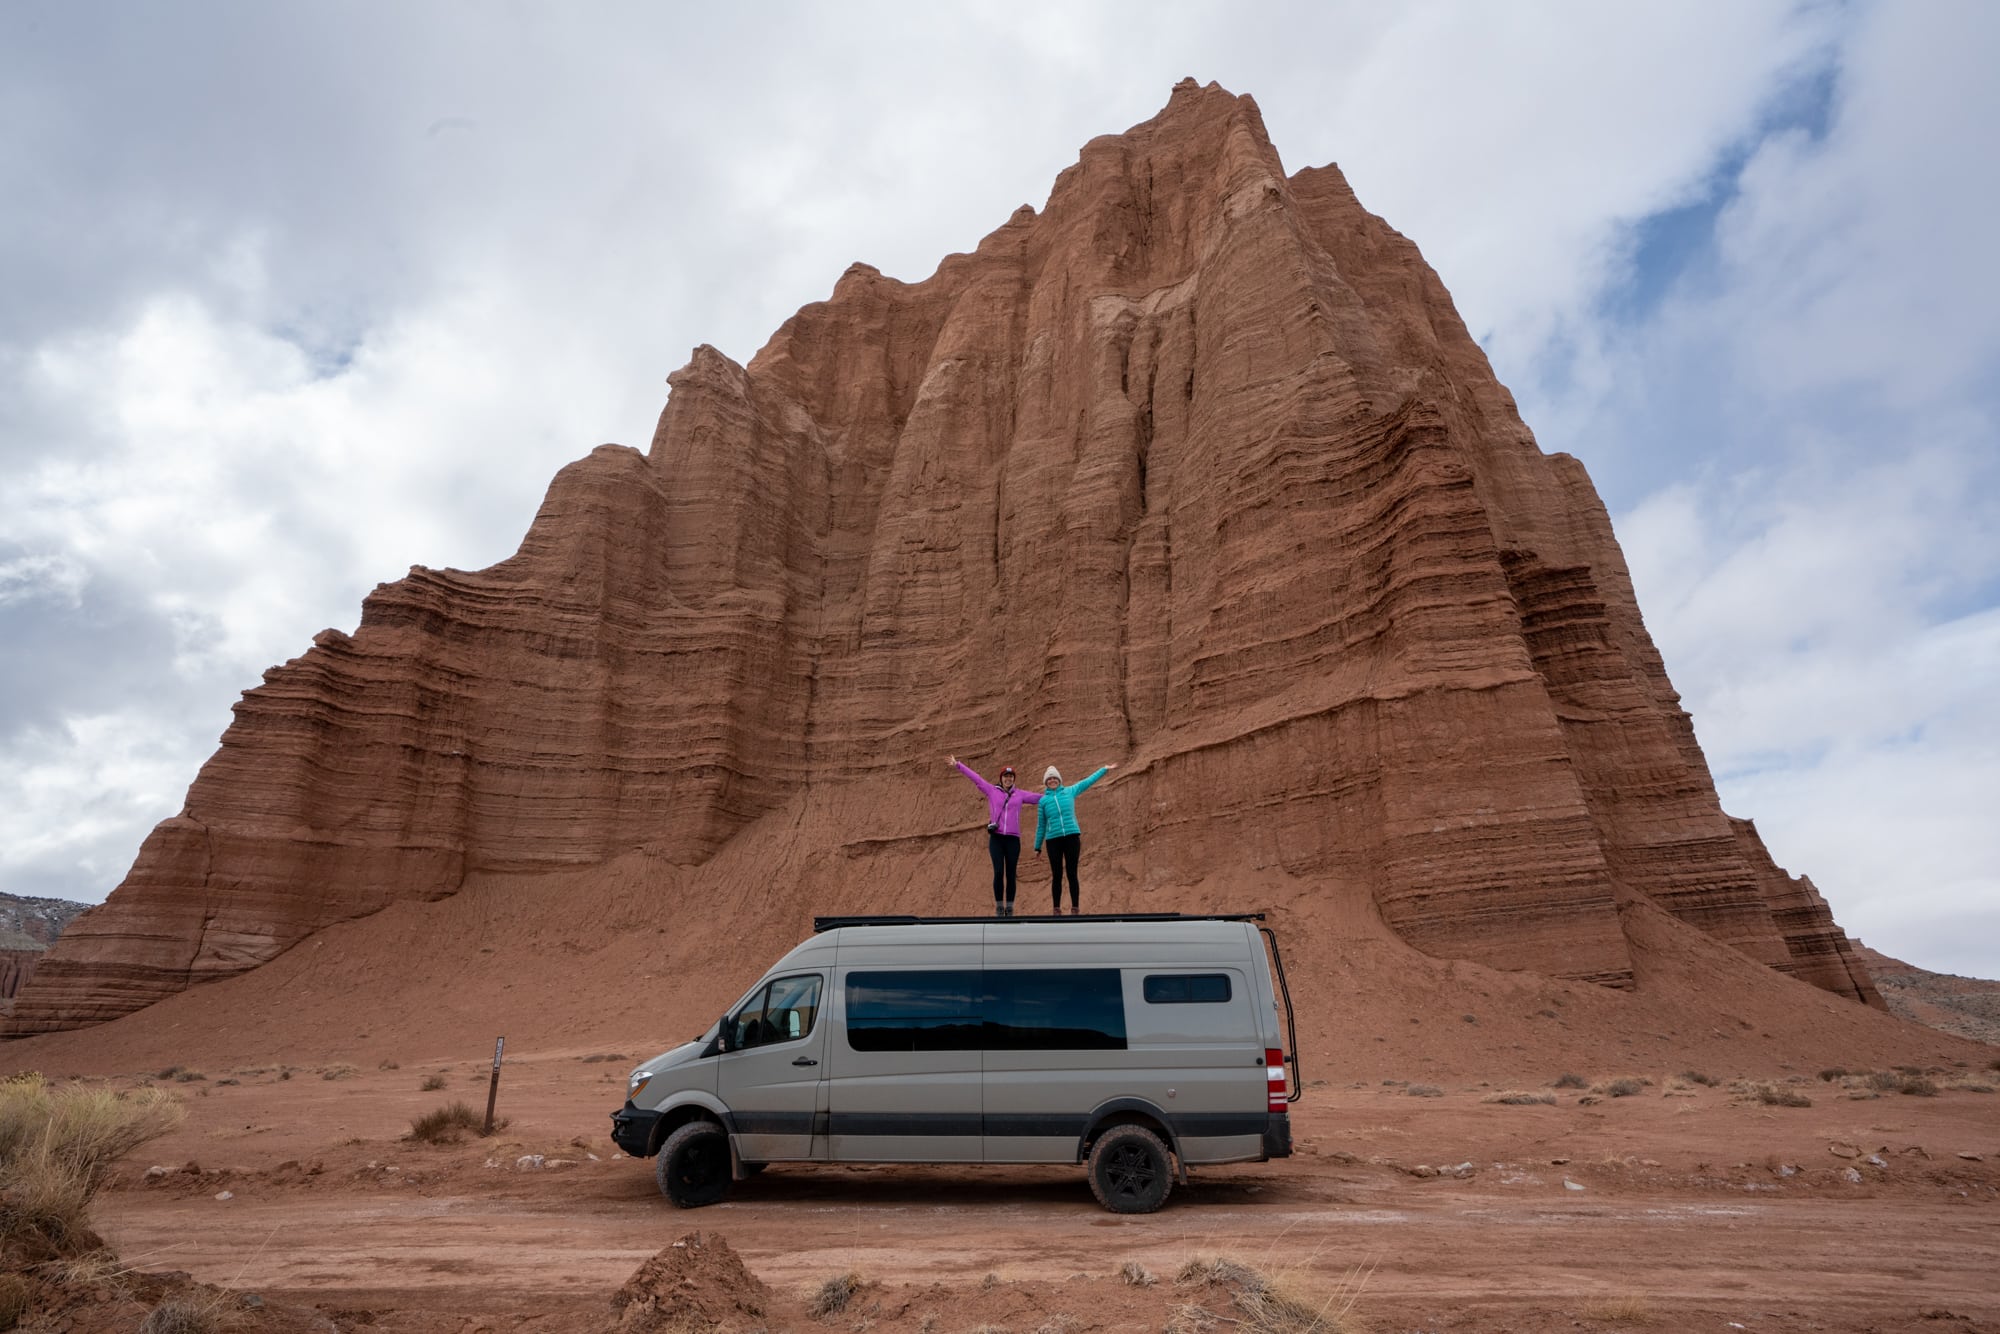 Capitol Reef National Park // Explore Utah National Parks in this 9-day road trip itinerary with the best hikes, activities & camping in Zion, Bryce, Capitol Reef, Arches & Canyonlands.